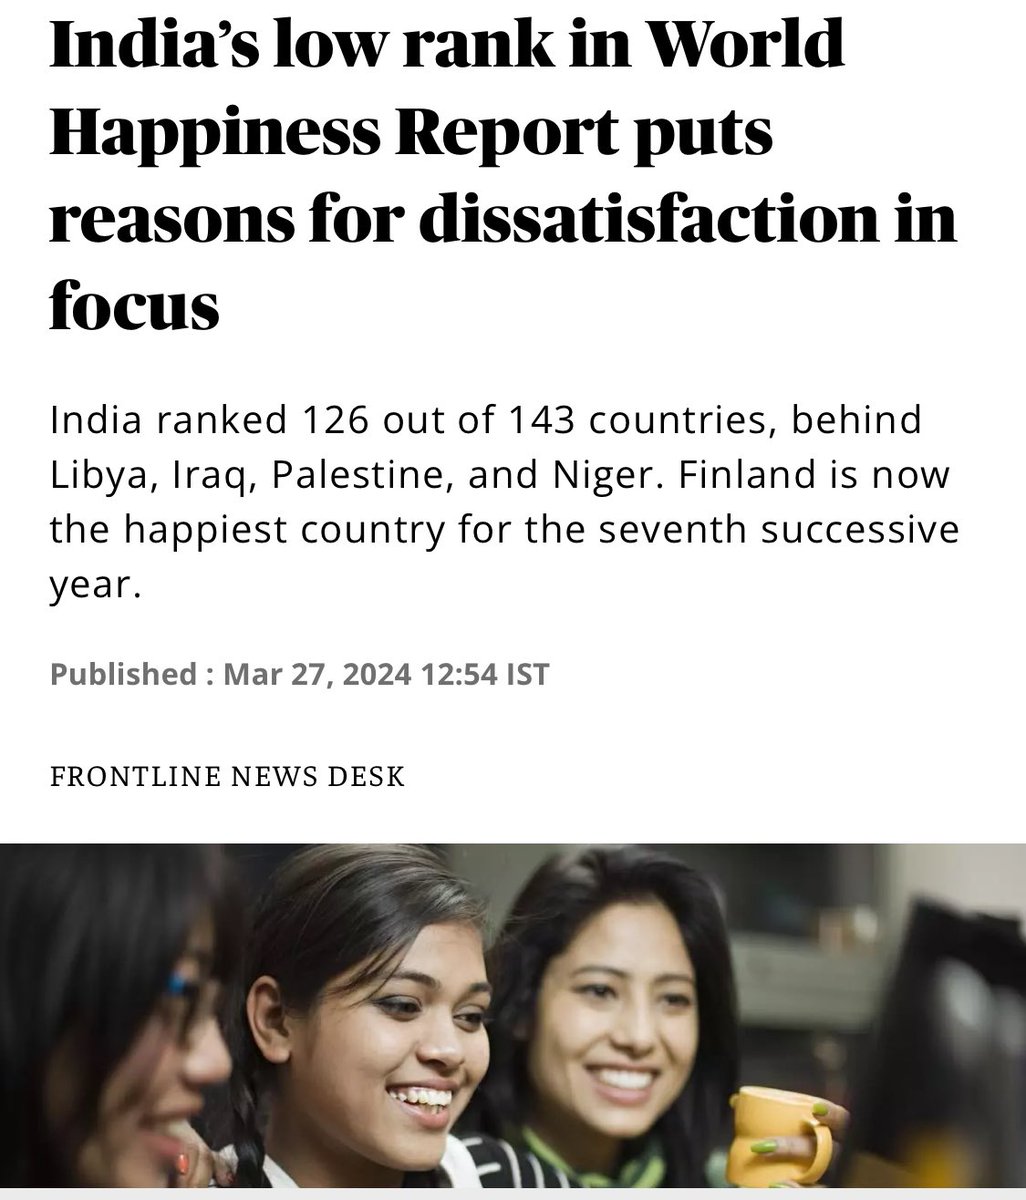 Lets talk about Happiness Index!!

Marriages are all about Happiness na!?!

Caste marriages are bonded not Because Love and happiness 
but of-course:- Society/Pressure/UNKILS/Anty